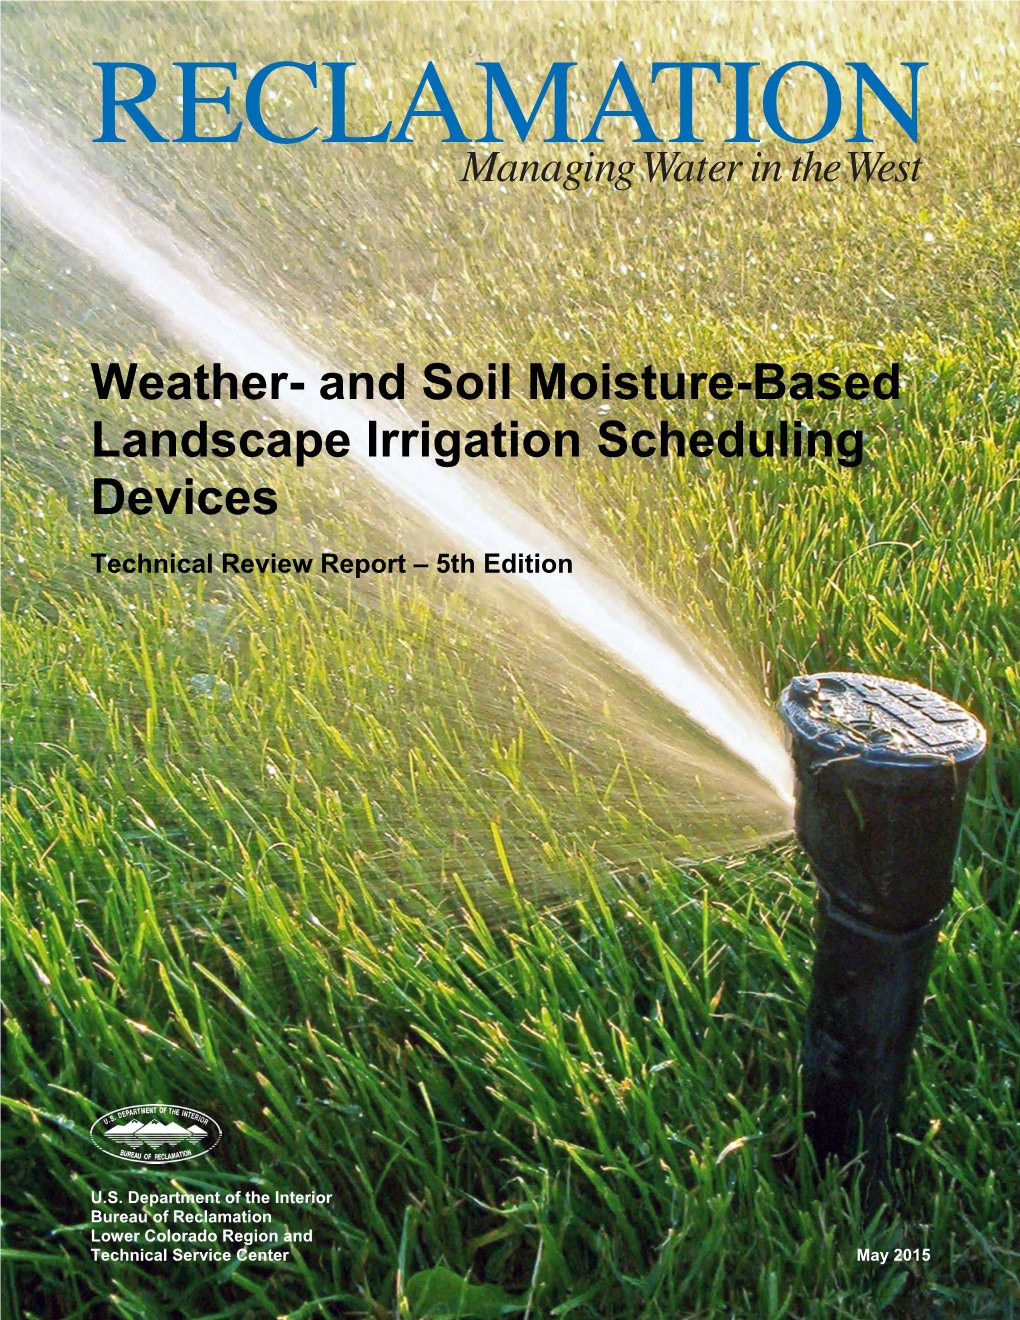 Weather- and Soil Moisture-Based Landscape Irrigation Scheduling Devices